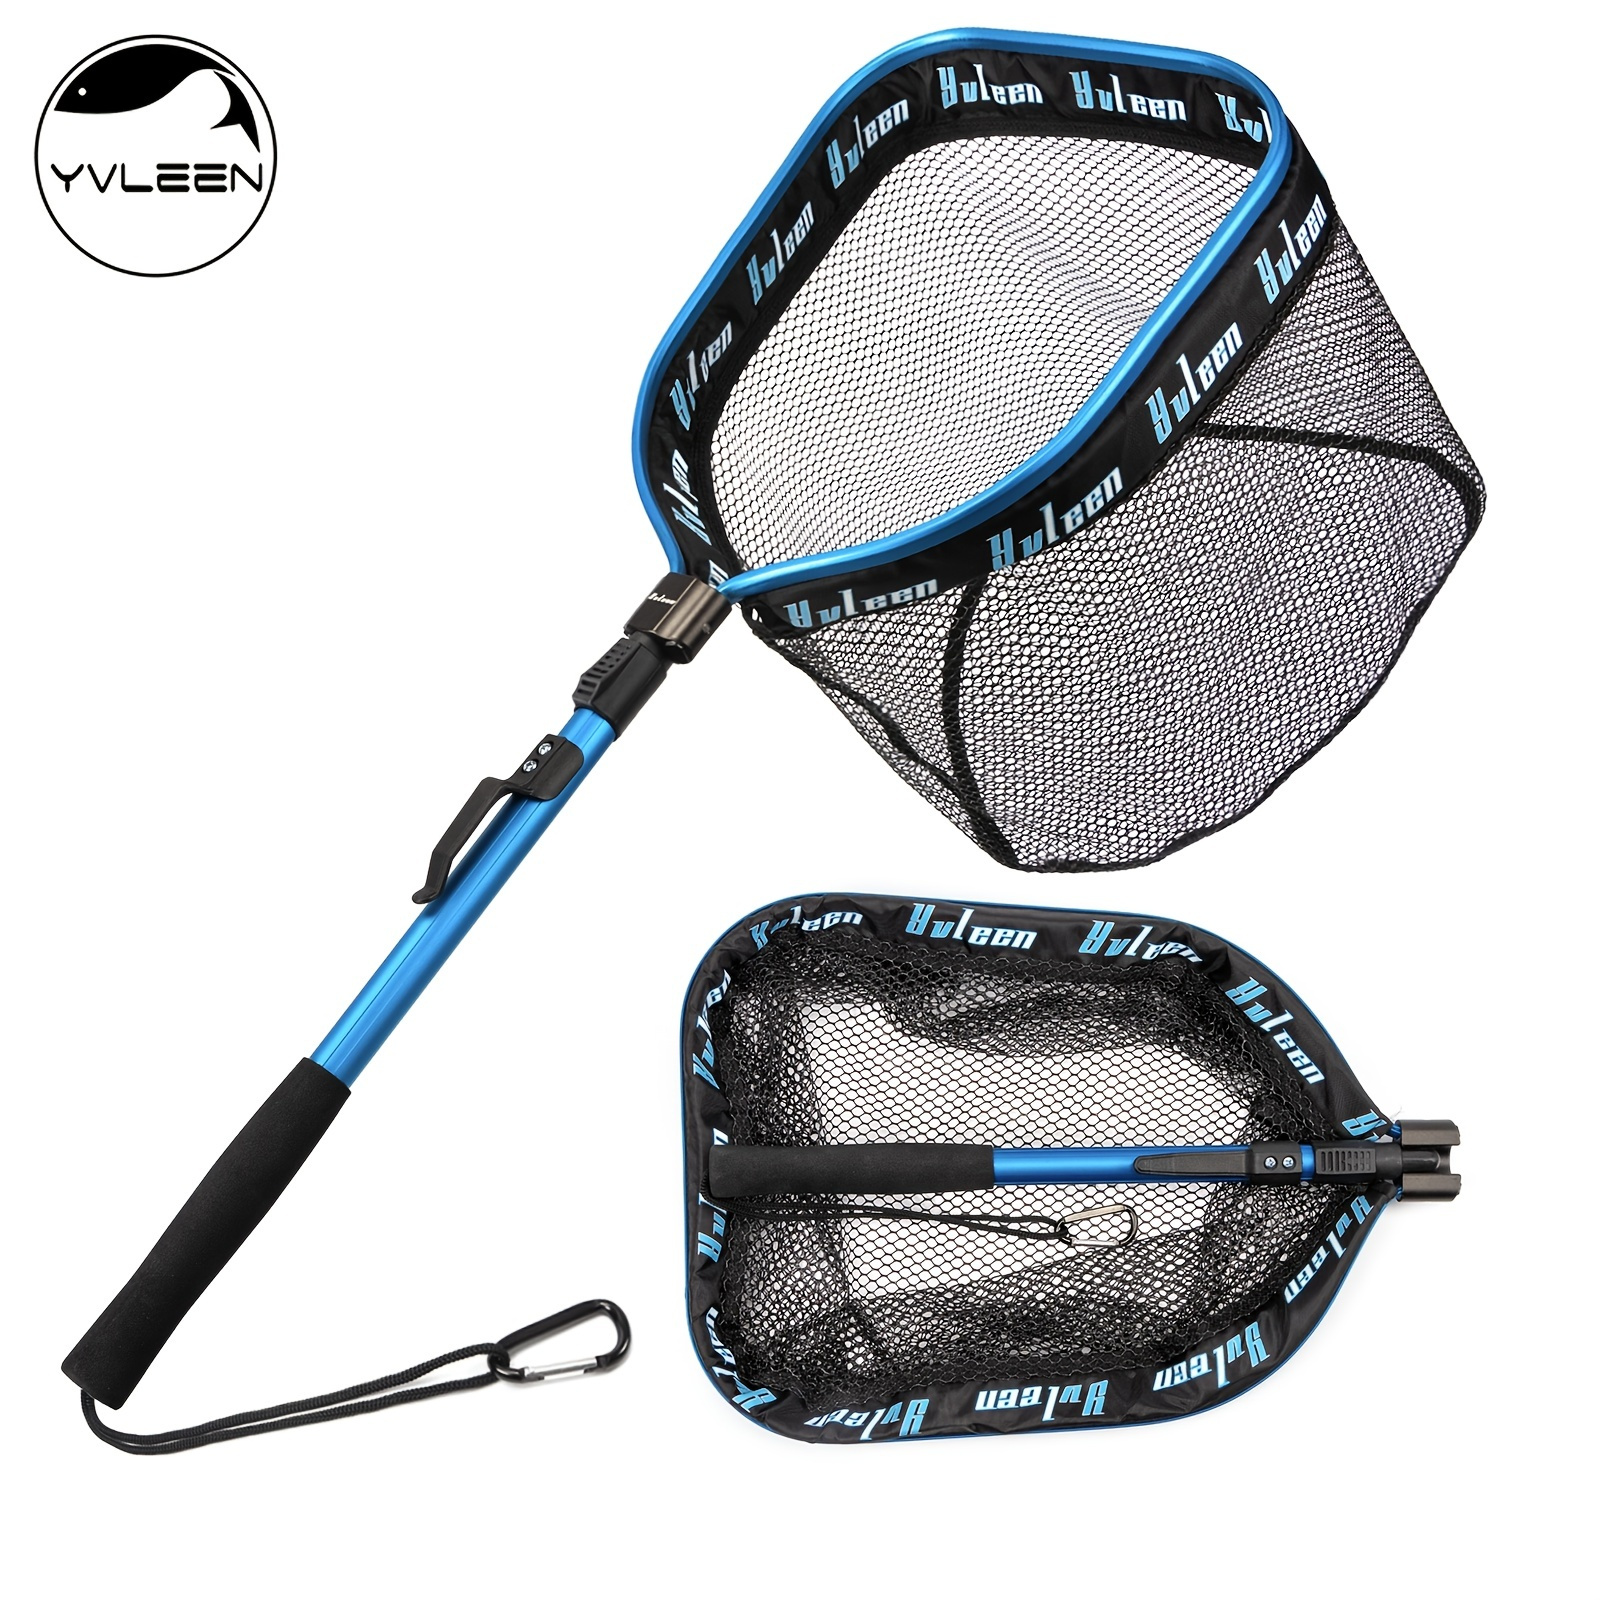 

Yvleen Floating Fishing Net - Folding Fishing Landing Net With Rubber Coating Mesh For Easy Fish Catch And Release, Fishing Net For Freshwater And Saltwater